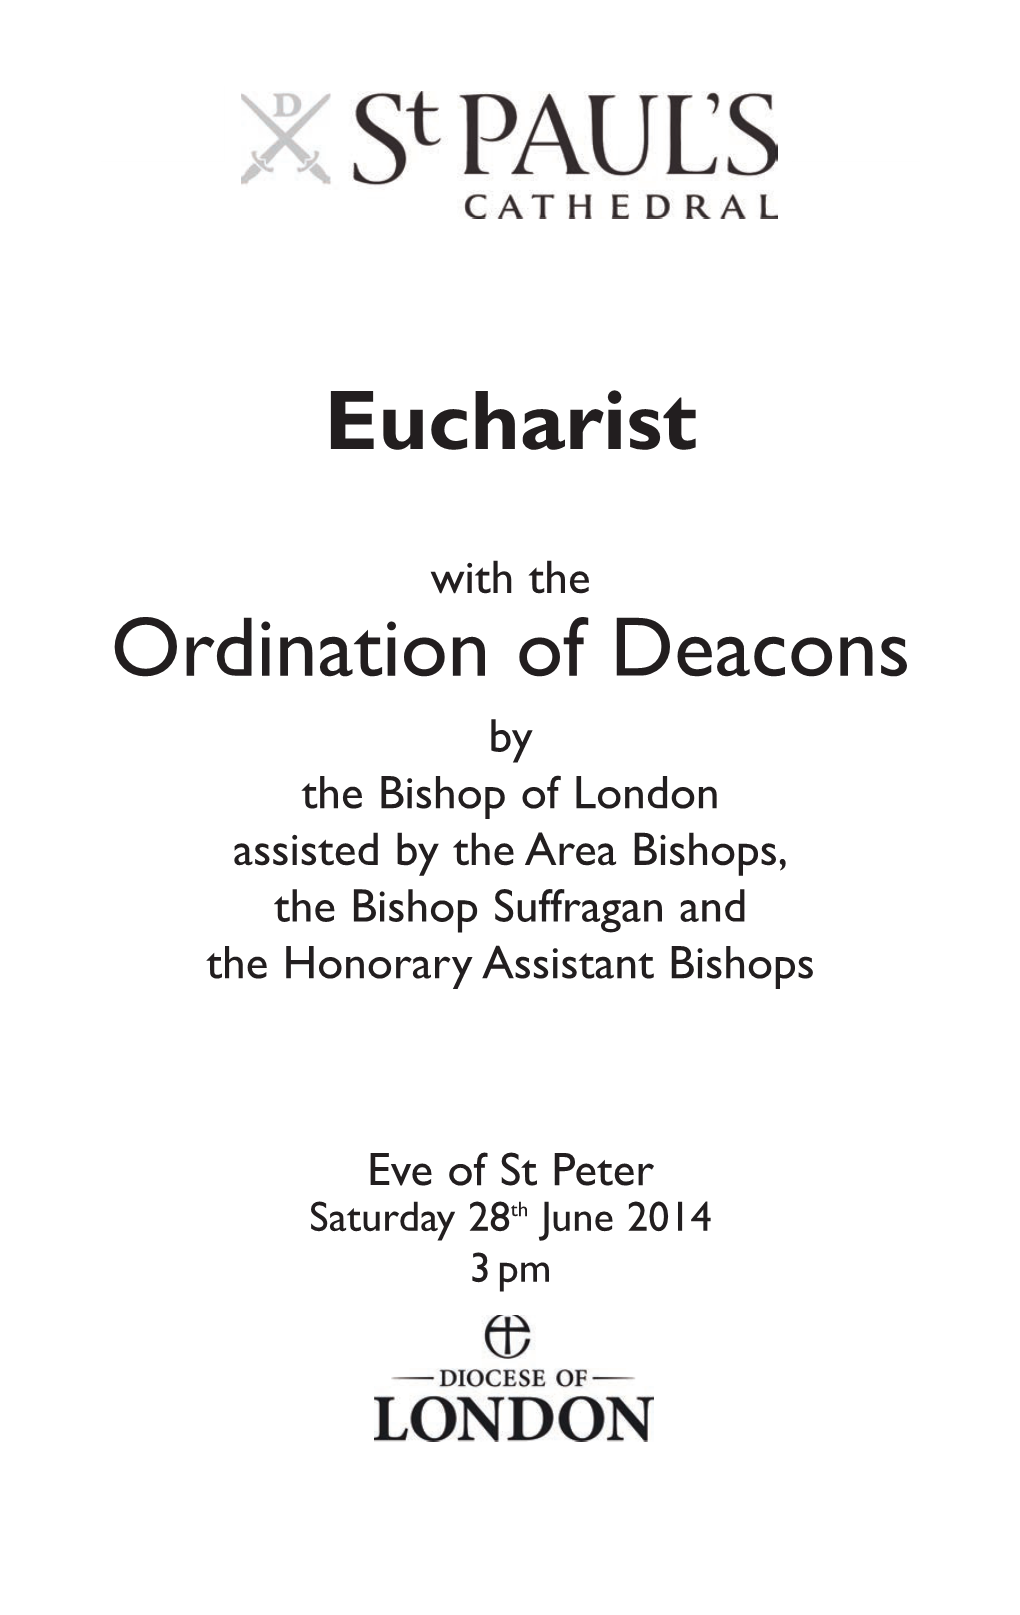 Ordination of Deacons by the Bishop of London Assisted by the Area Bishops, the Bishop Suffragan and the Honorary Assistant Bishops